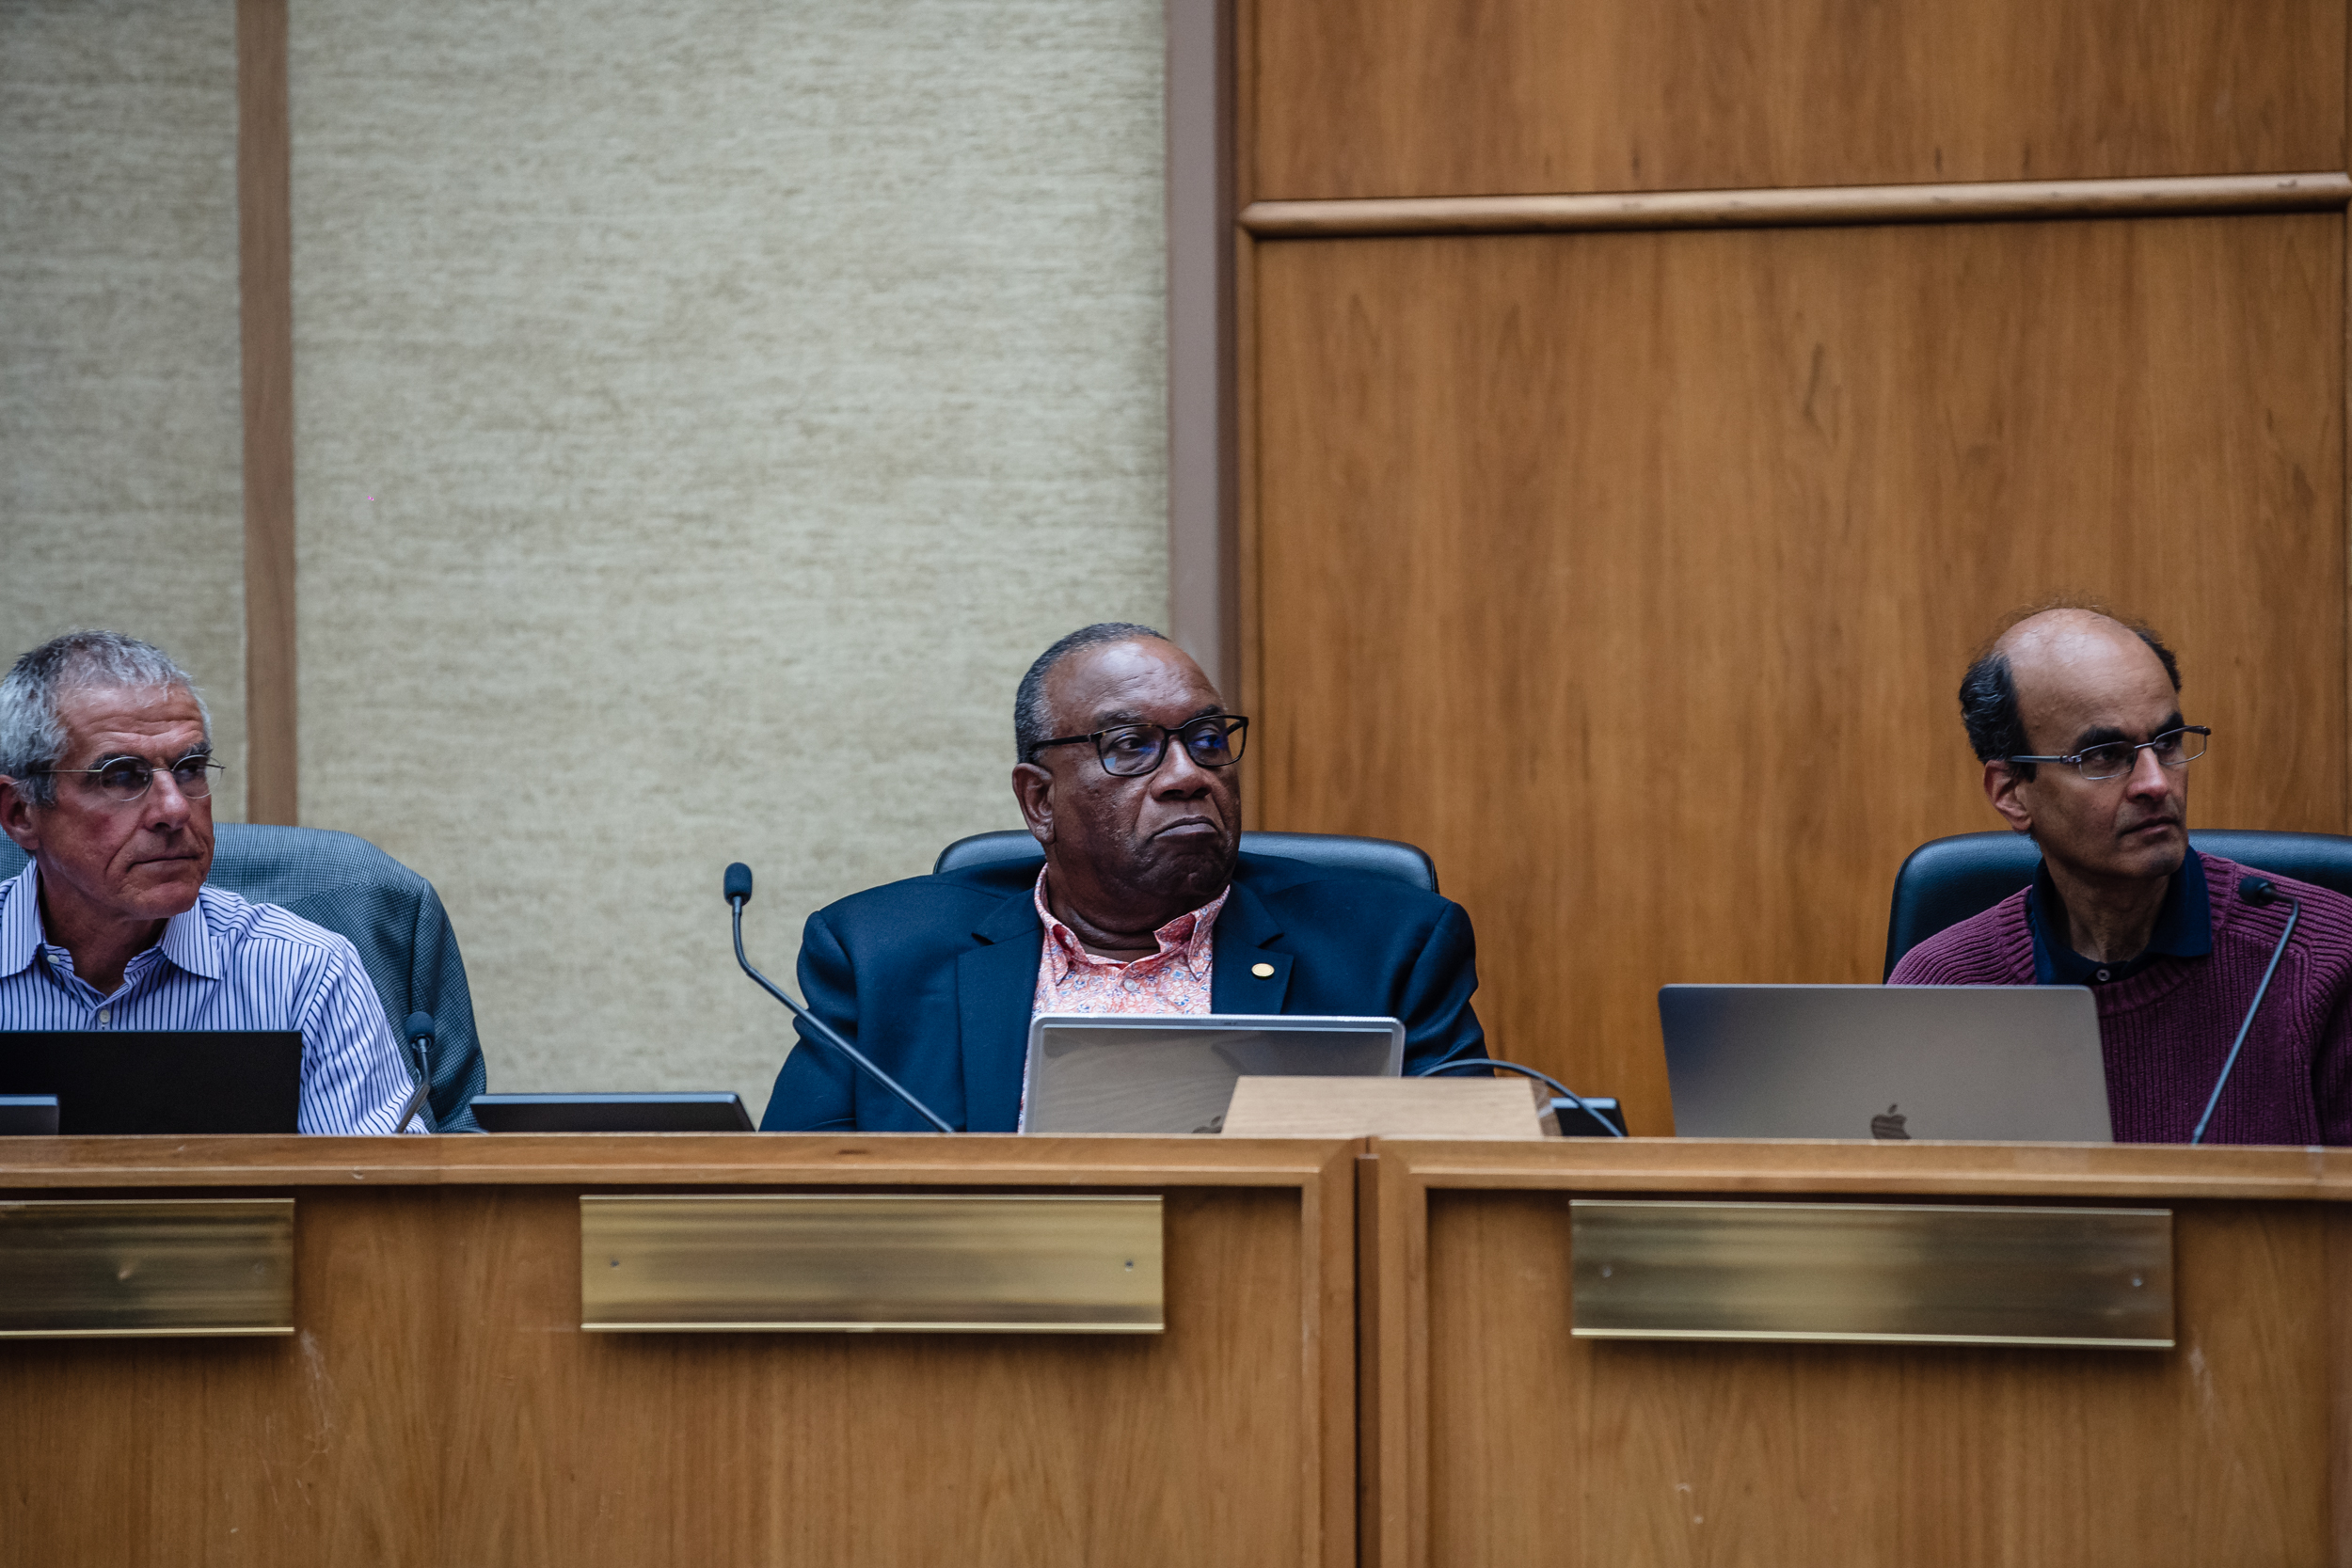 Lee Duran (left), Dr. Robert Lee Brown (center), and Mihir Bellare (right) at San Diego's Privacy Advisory Board meeting on March 30, 2023.